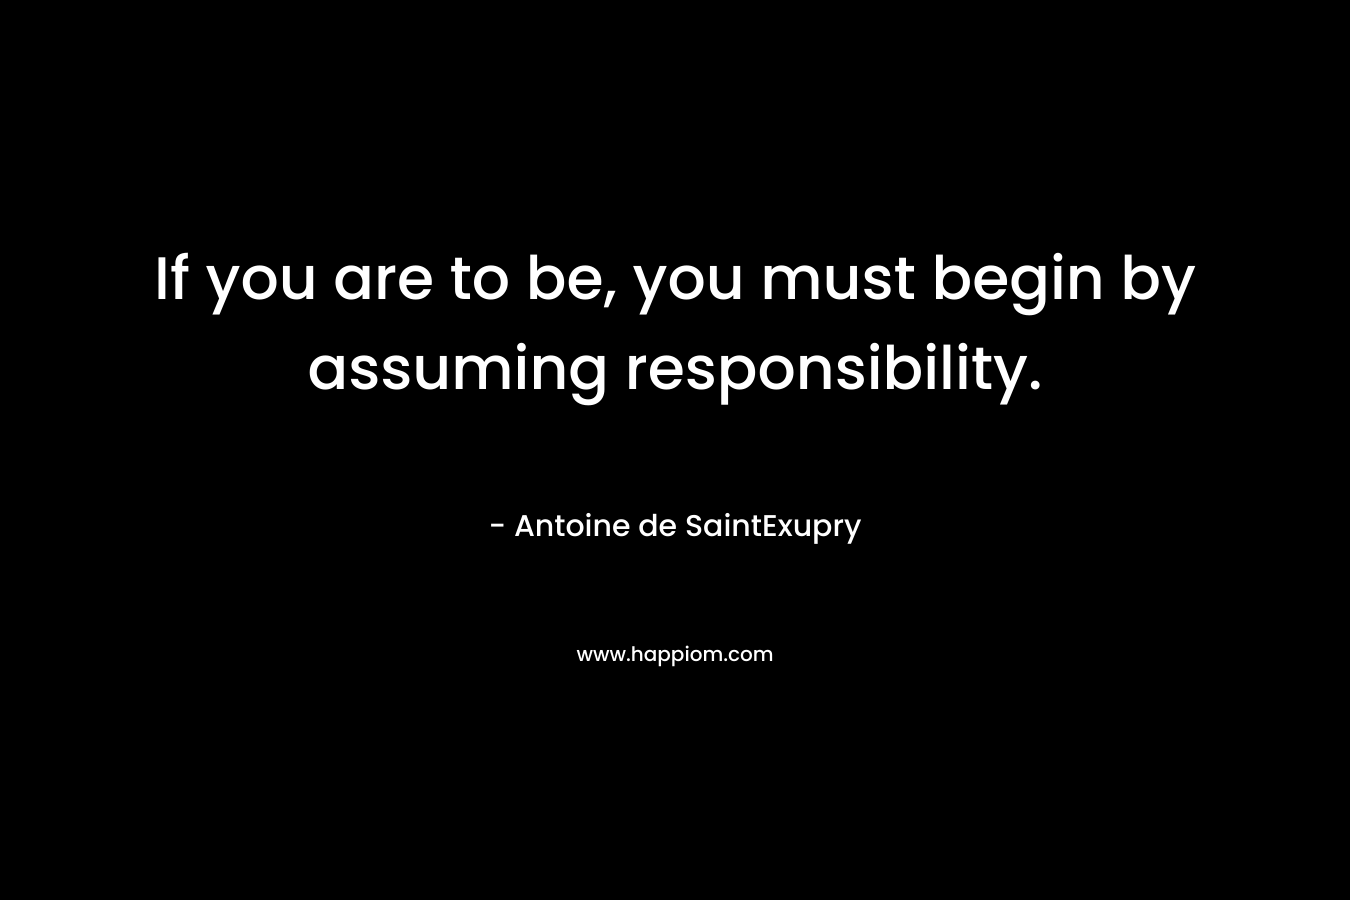 If you are to be, you must begin by assuming responsibility.